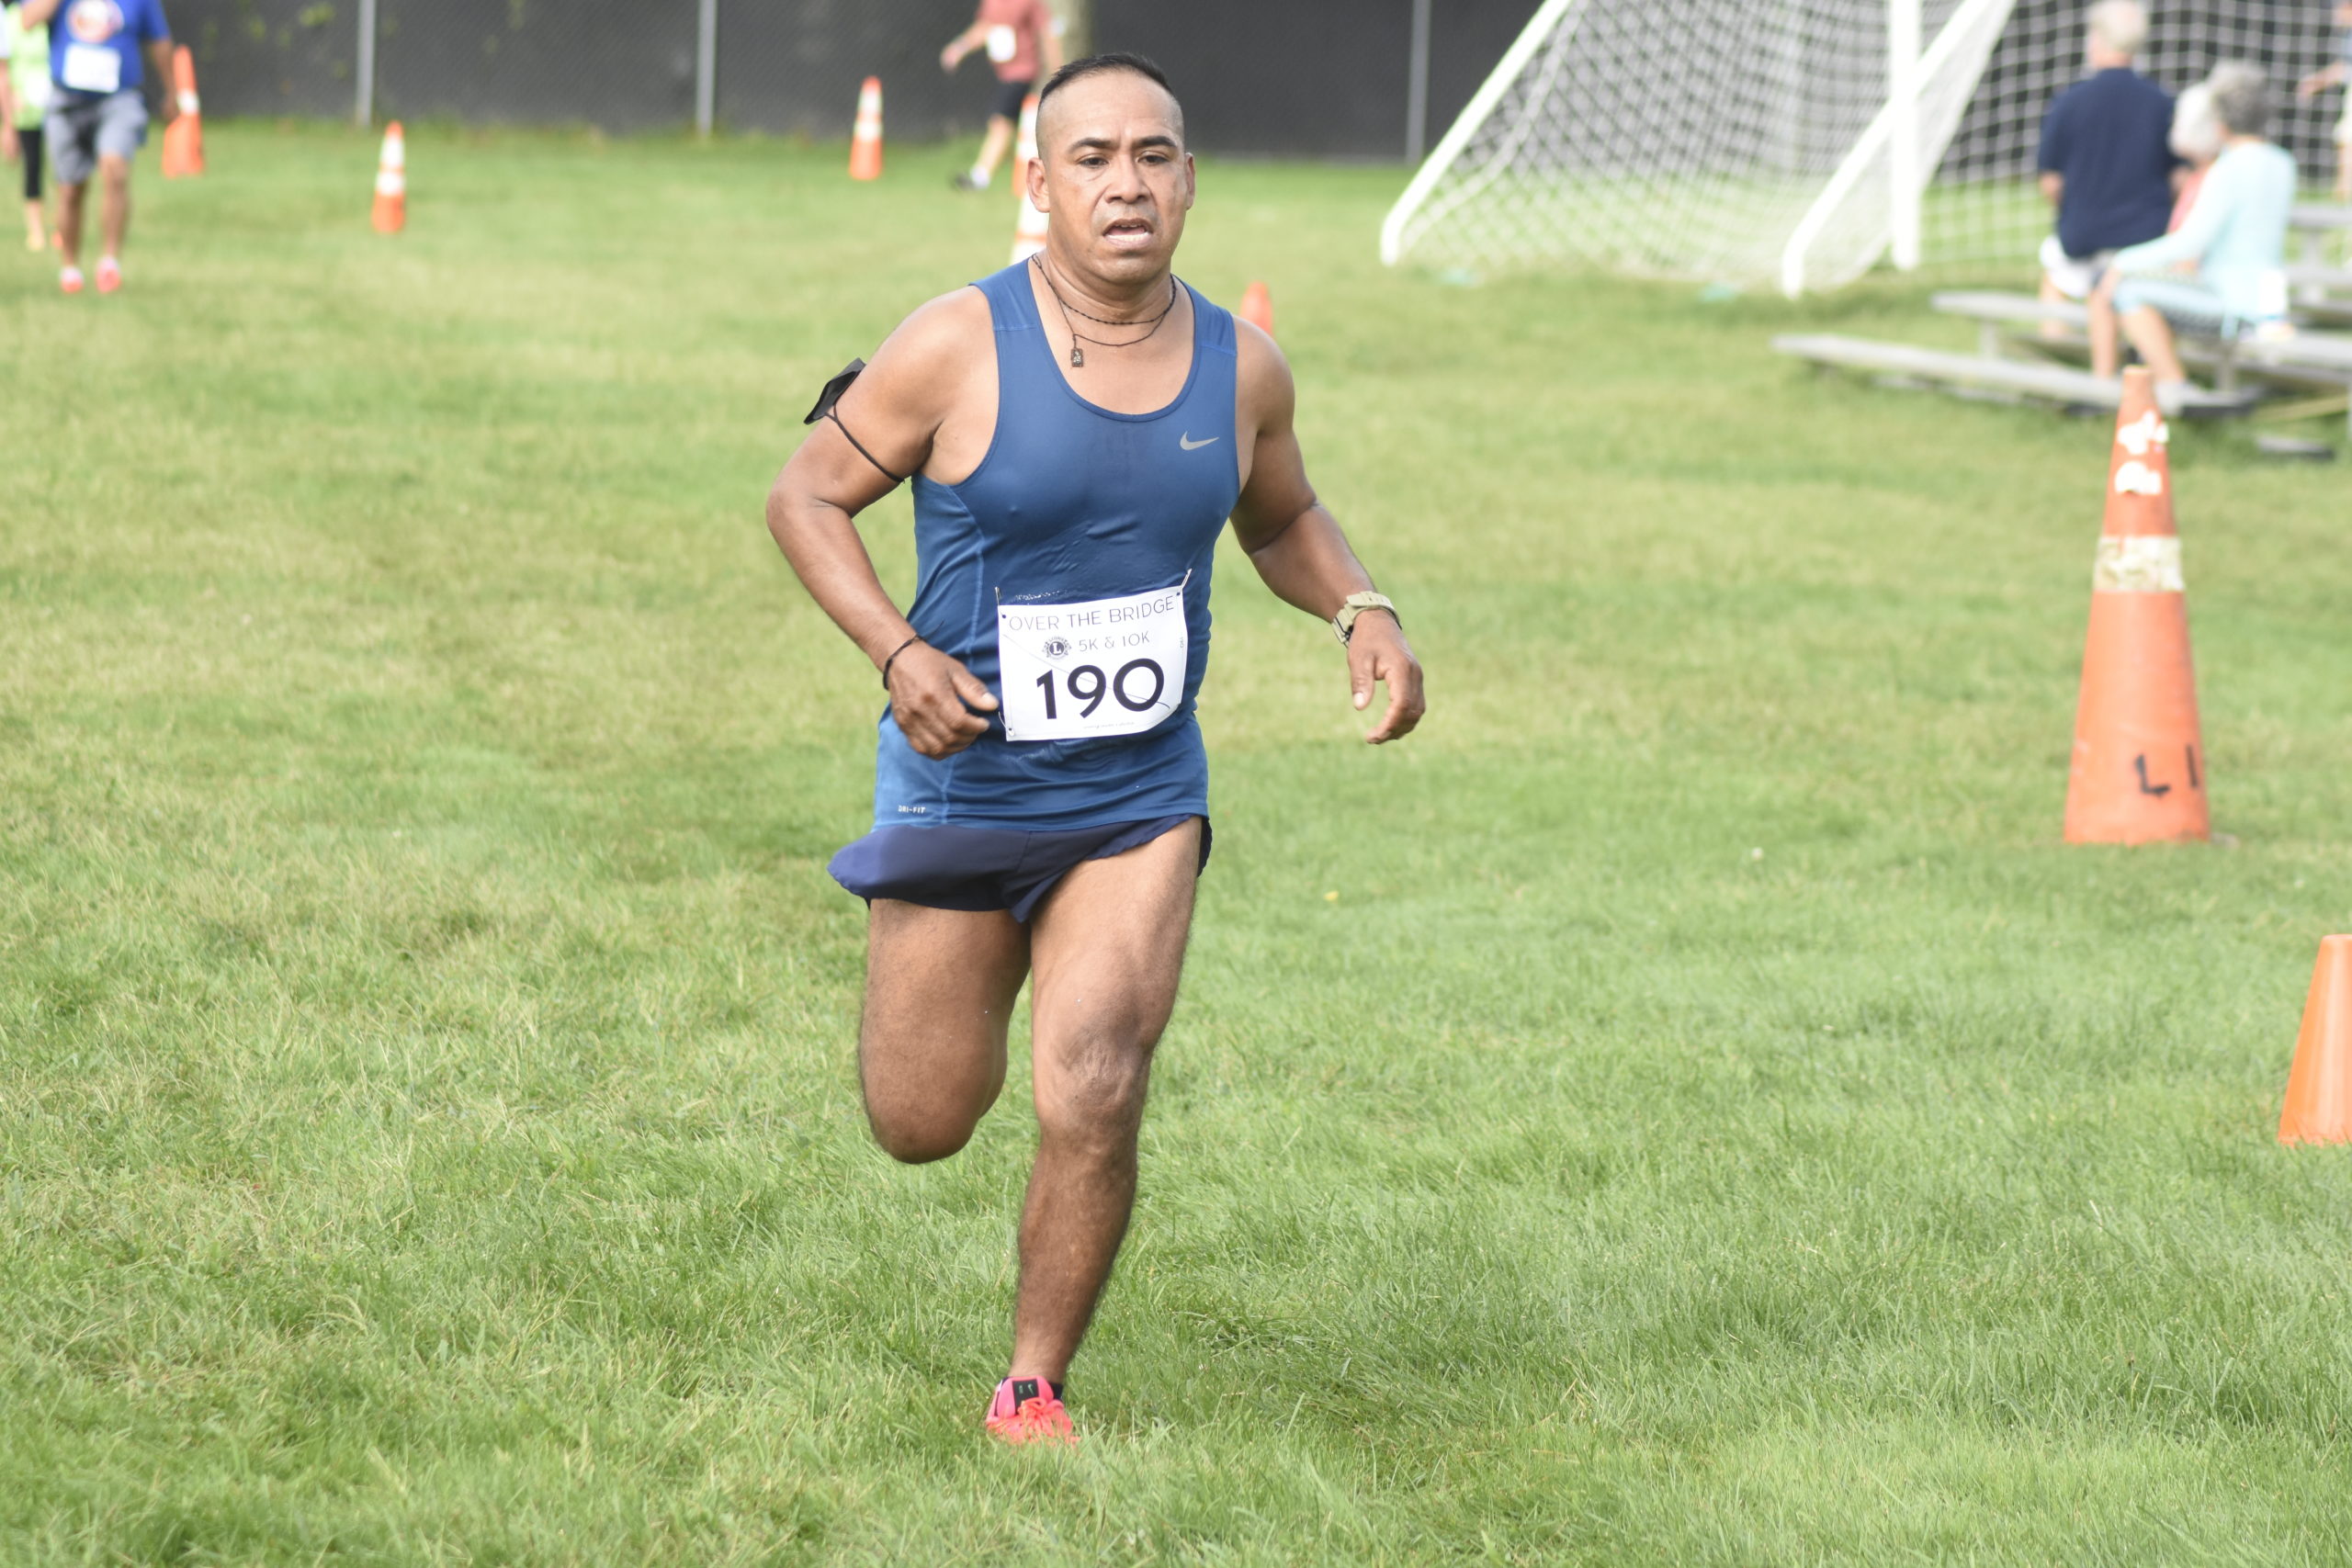 Miguel Morastitla of Southampton placed third in the 10K.